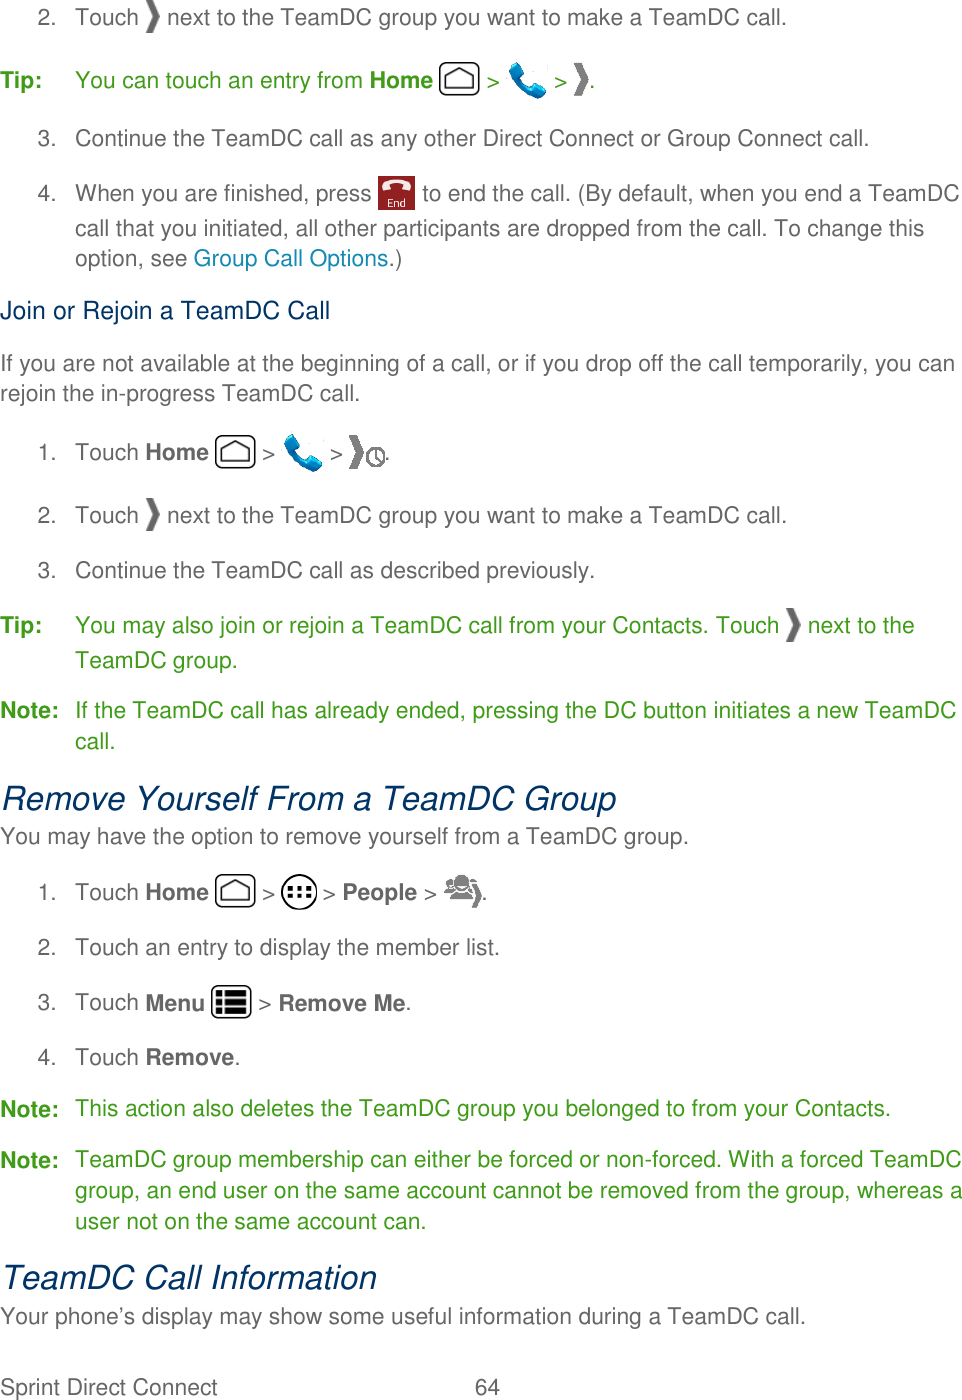 Sprint Direct Connect  64   2.  Touch   next to the TeamDC group you want to make a TeamDC call. Tip:  You can touch an entry from Home   &gt;   &gt;  . 3.  Continue the TeamDC call as any other Direct Connect or Group Connect call. 4.  When you are finished, press   to end the call. (By default, when you end a TeamDC call that you initiated, all other participants are dropped from the call. To change this option, see Group Call Options.) Join or Rejoin a TeamDC Call If you are not available at the beginning of a call, or if you drop off the call temporarily, you can rejoin the in-progress TeamDC call. 1.  Touch Home   &gt;   &gt;  . 2.  Touch   next to the TeamDC group you want to make a TeamDC call. 3.  Continue the TeamDC call as described previously. Tip:  You may also join or rejoin a TeamDC call from your Contacts. Touch   next to the TeamDC group. Note:  If the TeamDC call has already ended, pressing the DC button initiates a new TeamDC call. Remove Yourself From a TeamDC Group You may have the option to remove yourself from a TeamDC group. 1.  Touch Home   &gt;   &gt; People &gt;  . 2.  Touch an entry to display the member list. 3.  Touch Menu   &gt; Remove Me. 4.  Touch Remove. Note:  This action also deletes the TeamDC group you belonged to from your Contacts. Note:  TeamDC group membership can either be forced or non-forced. With a forced TeamDC group, an end user on the same account cannot be removed from the group, whereas a user not on the same account can. TeamDC Call Information Your phone’s display may show some useful information during a TeamDC call. 